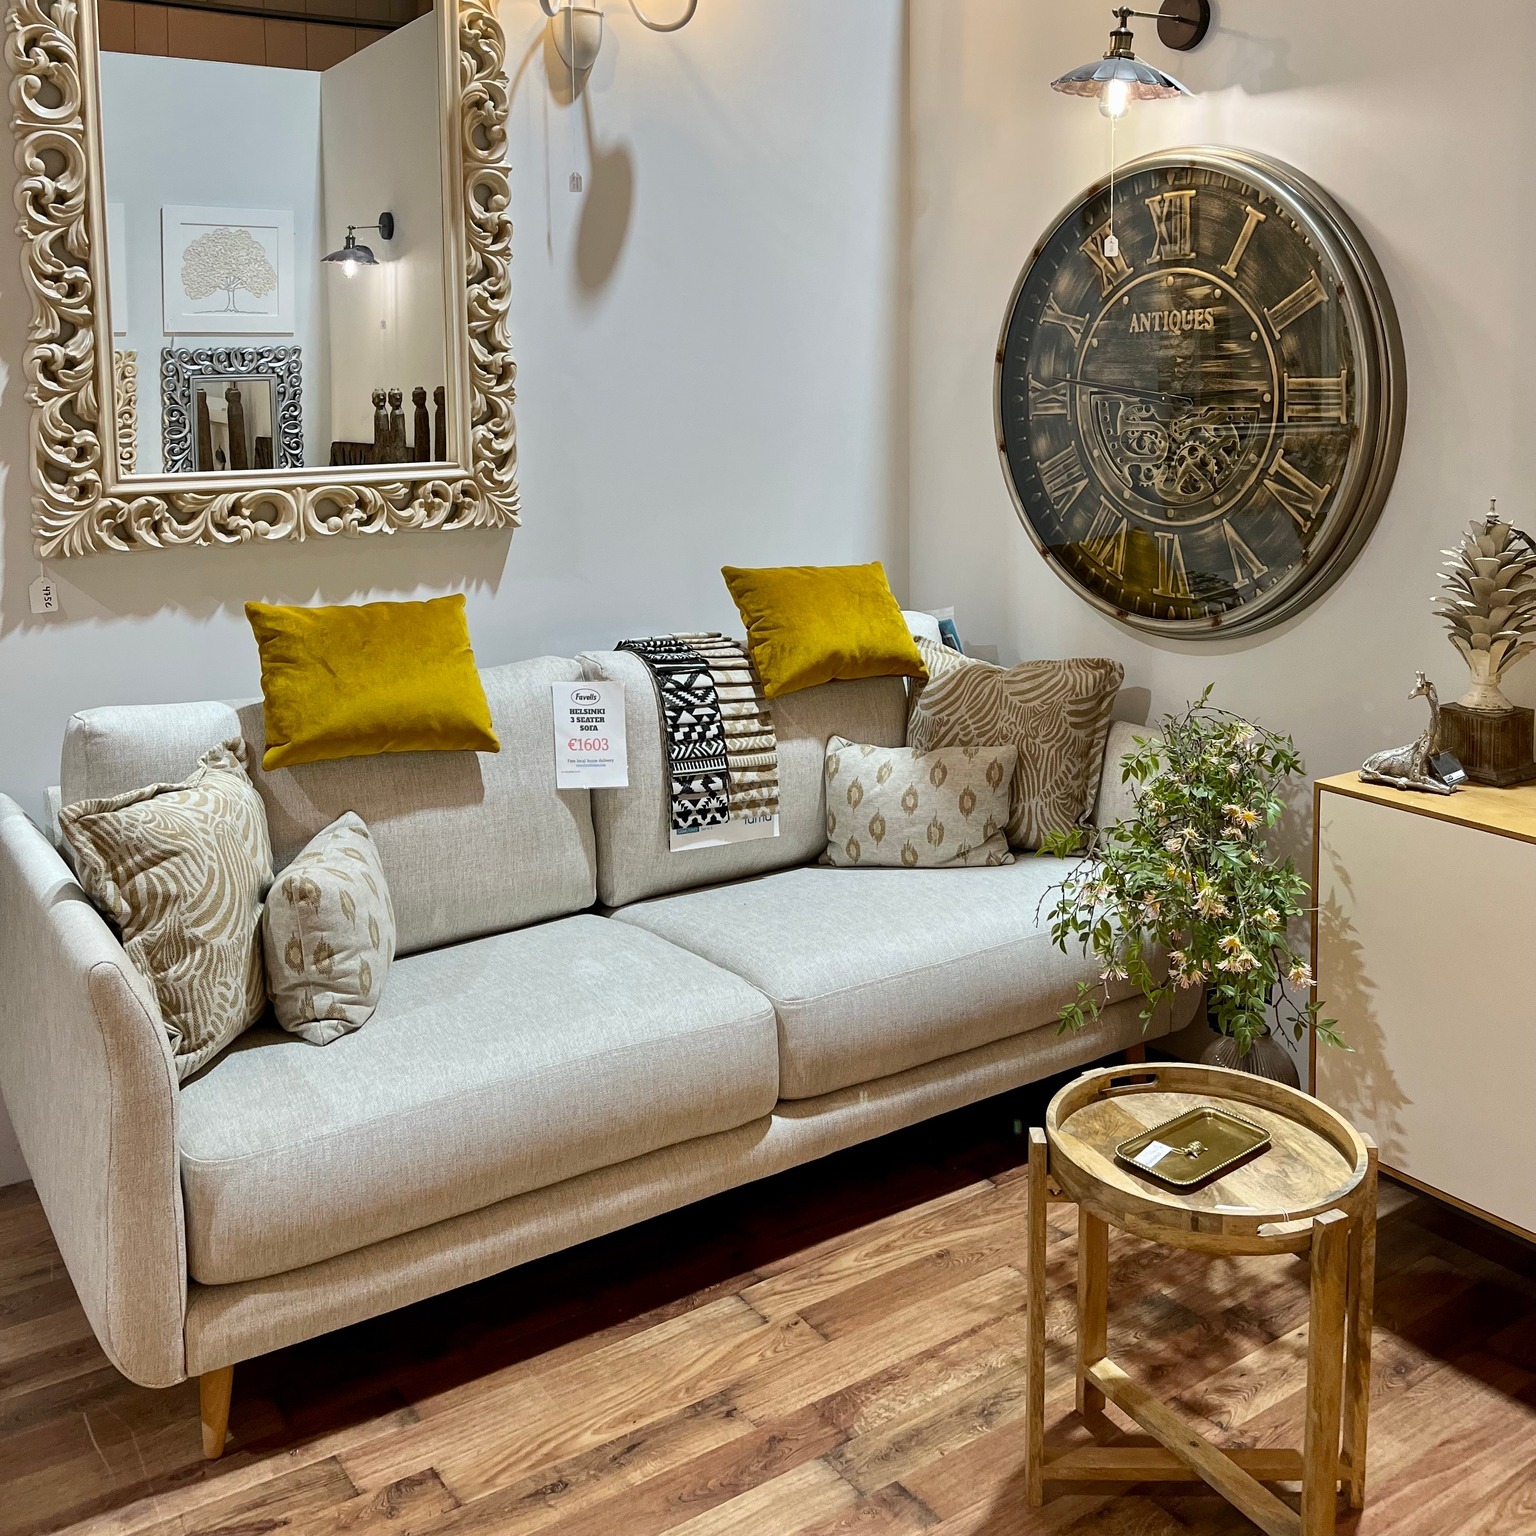 Favells has a large variety of unique indoor furniture and decorations. We have everything on display in our showroom.

 » Outdoor Furniture Fuengirola, Costa Del Sol, Spain